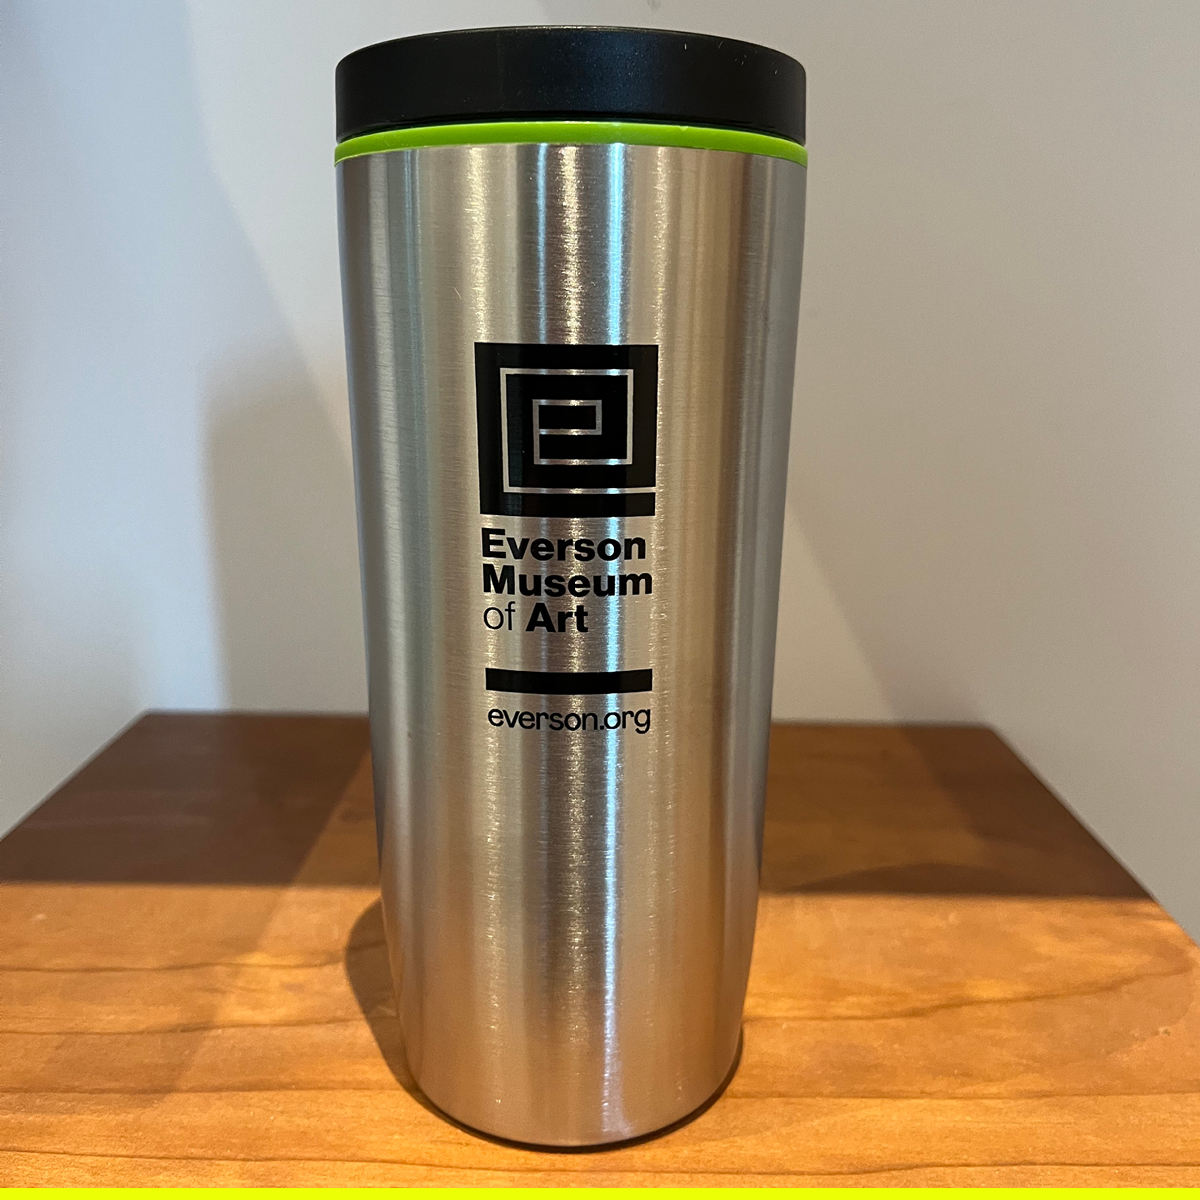 Keep your drinks cool all summer long with an Everson thermos! Available for purchase in the #museumshop!